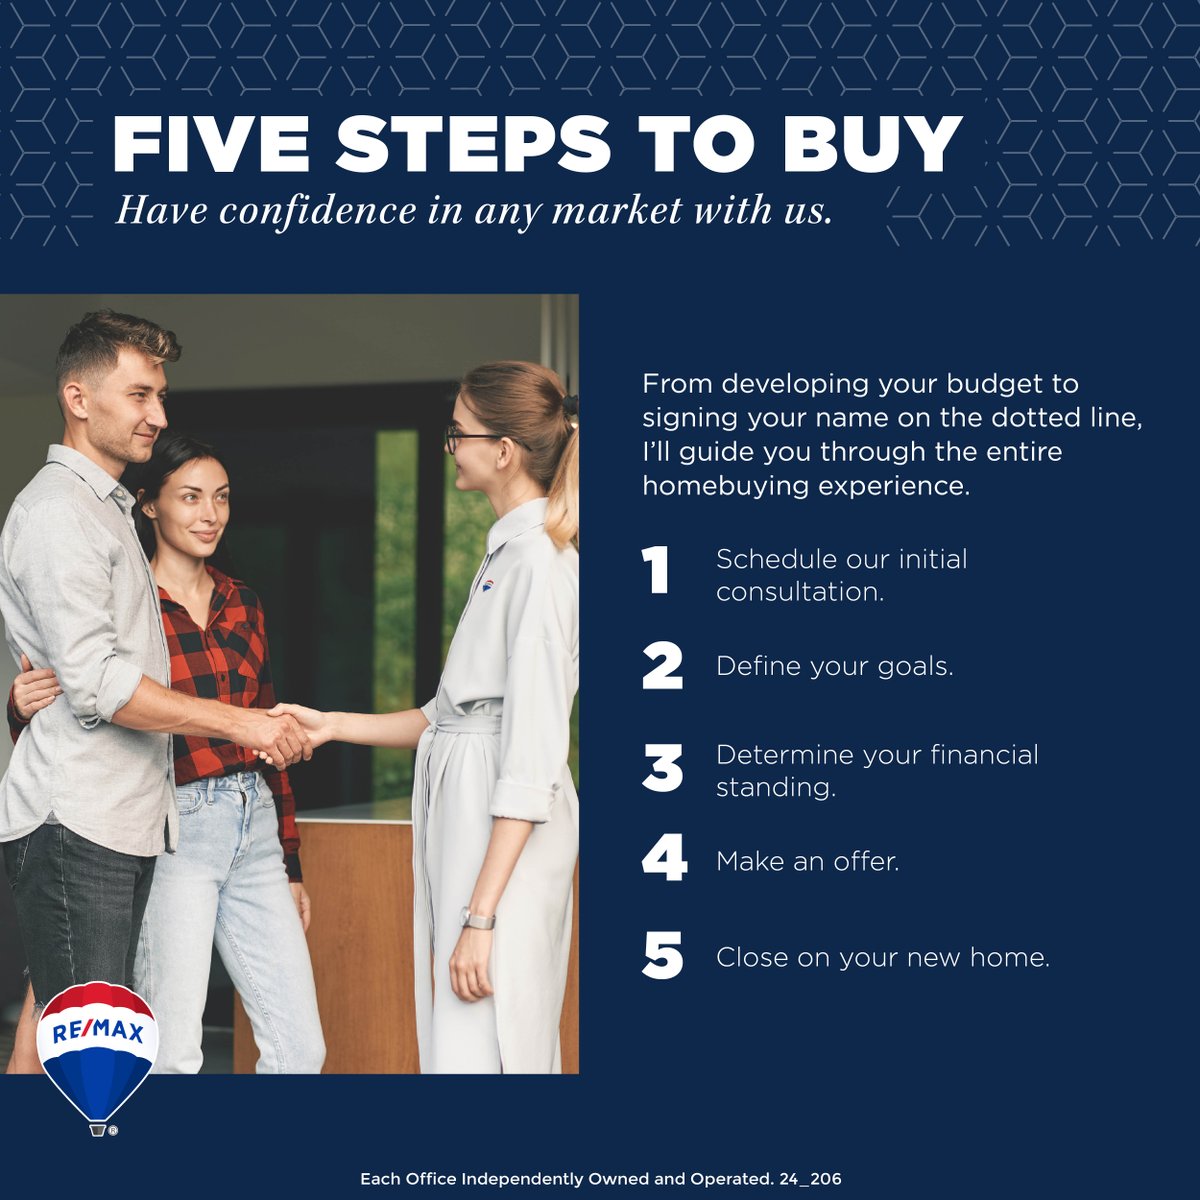 Unlocking the secrets to successful purchasing in 5 simple steps! 💡💳 #SmartShopping #StepByStepGuide #MelvilleRealEstateTeam #Buying